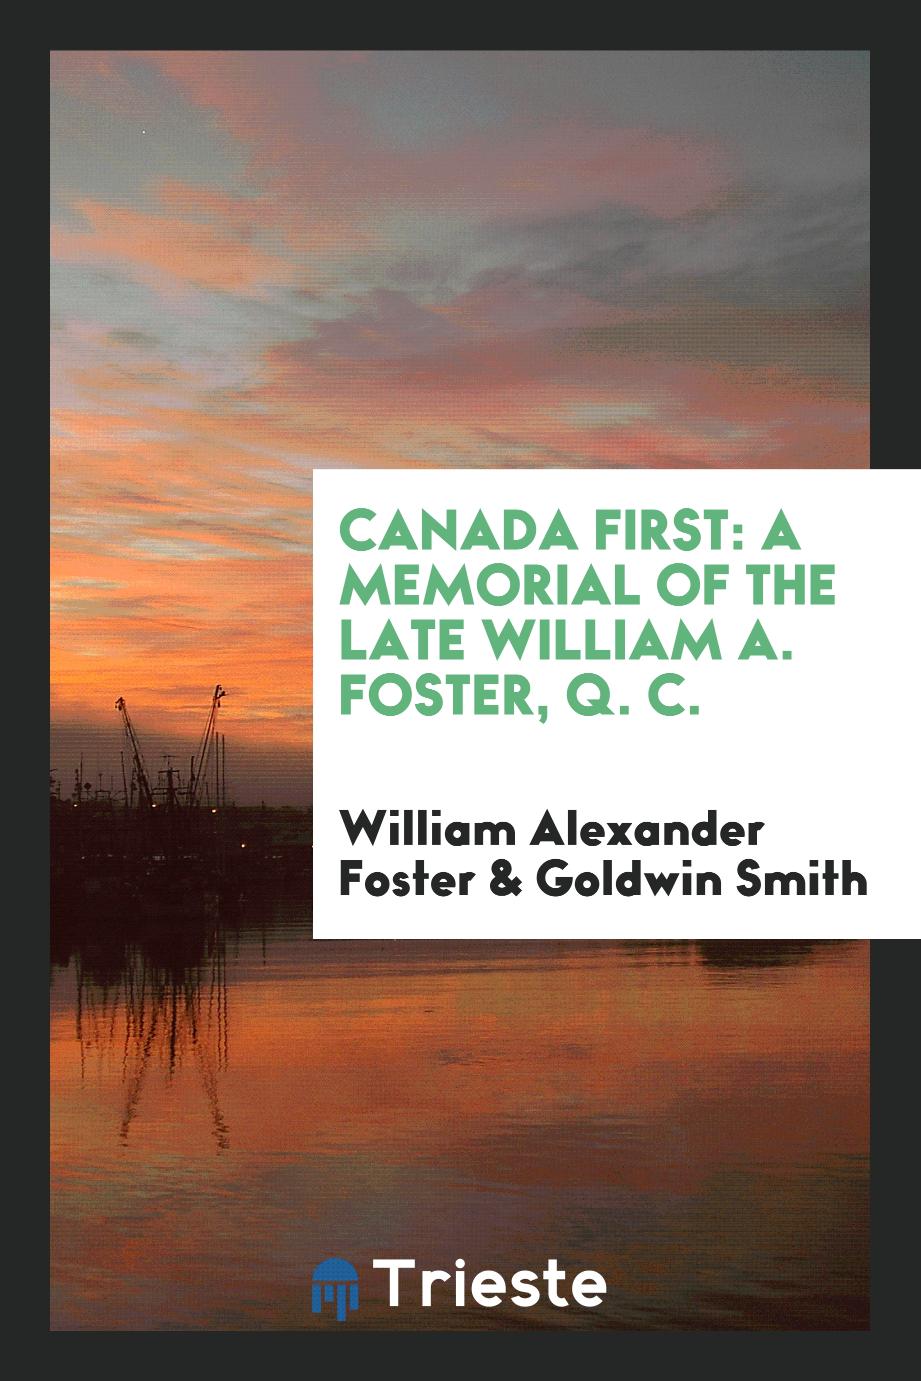 Canada First: A Memorial of the Late William A. Foster, Q. C.